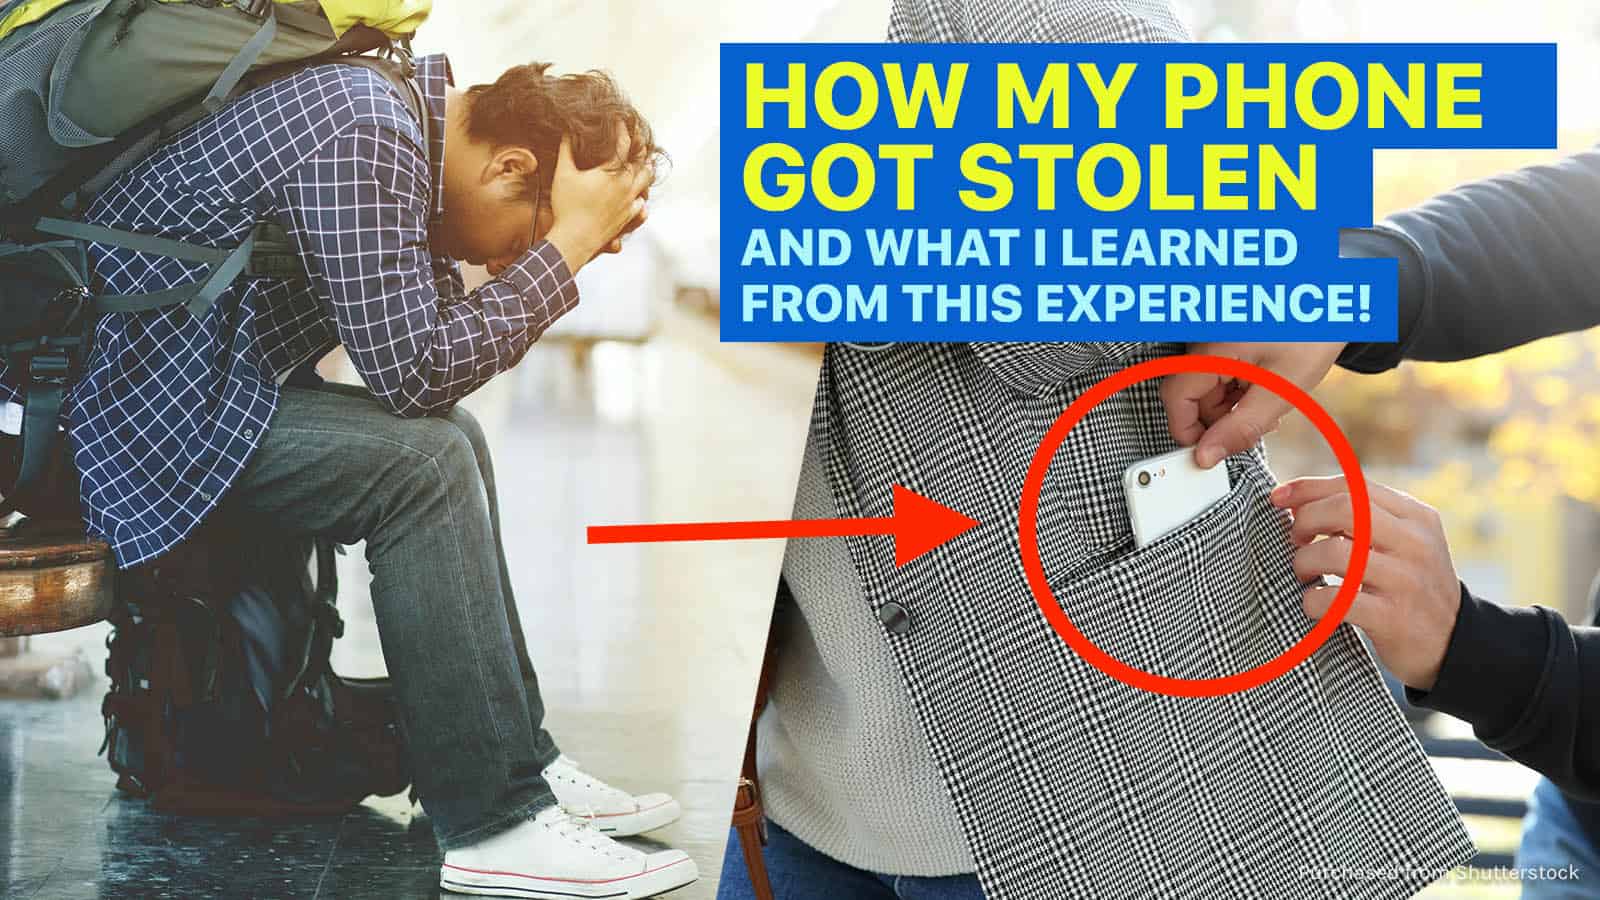 Best anti-theft handbags, backpacks and accessories that stop pickpockets -  The Points Guy